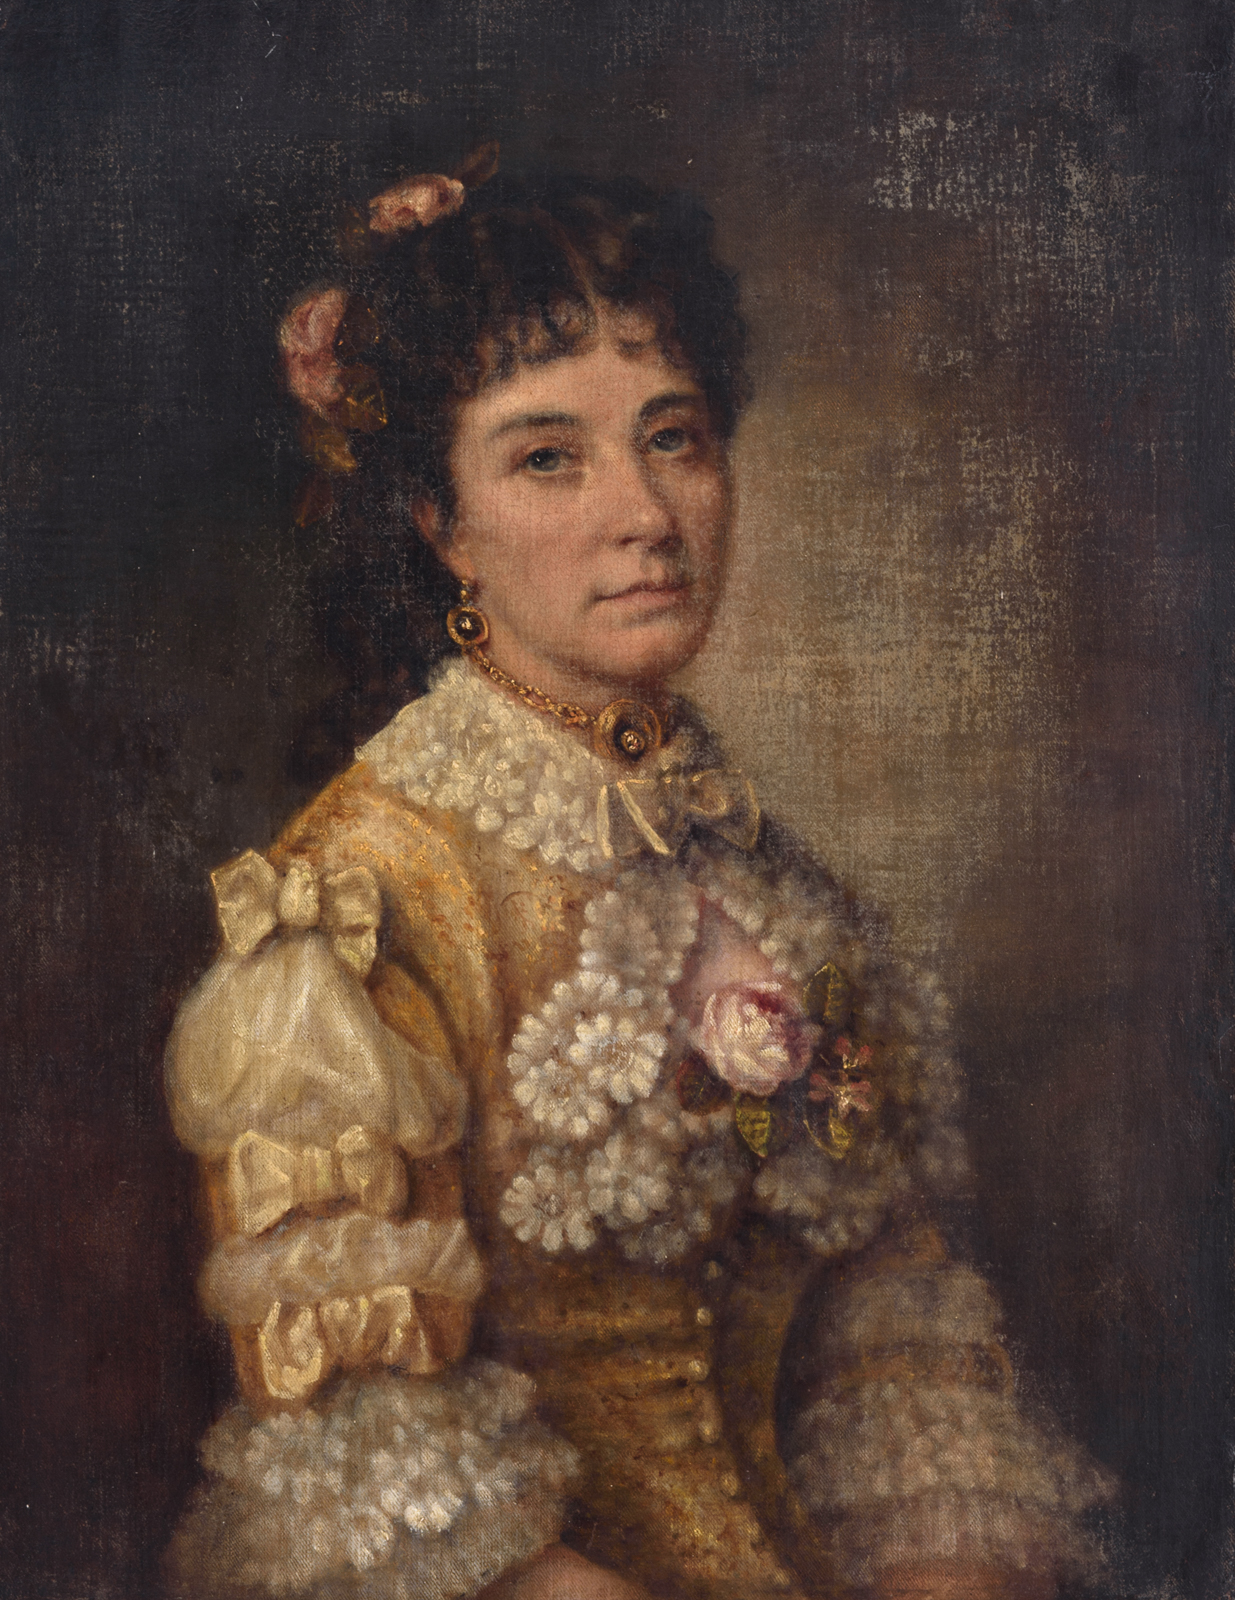 No visible signature, the portrait of a noble young lady, 19thC, oil on canvas, 56 x 73 cm